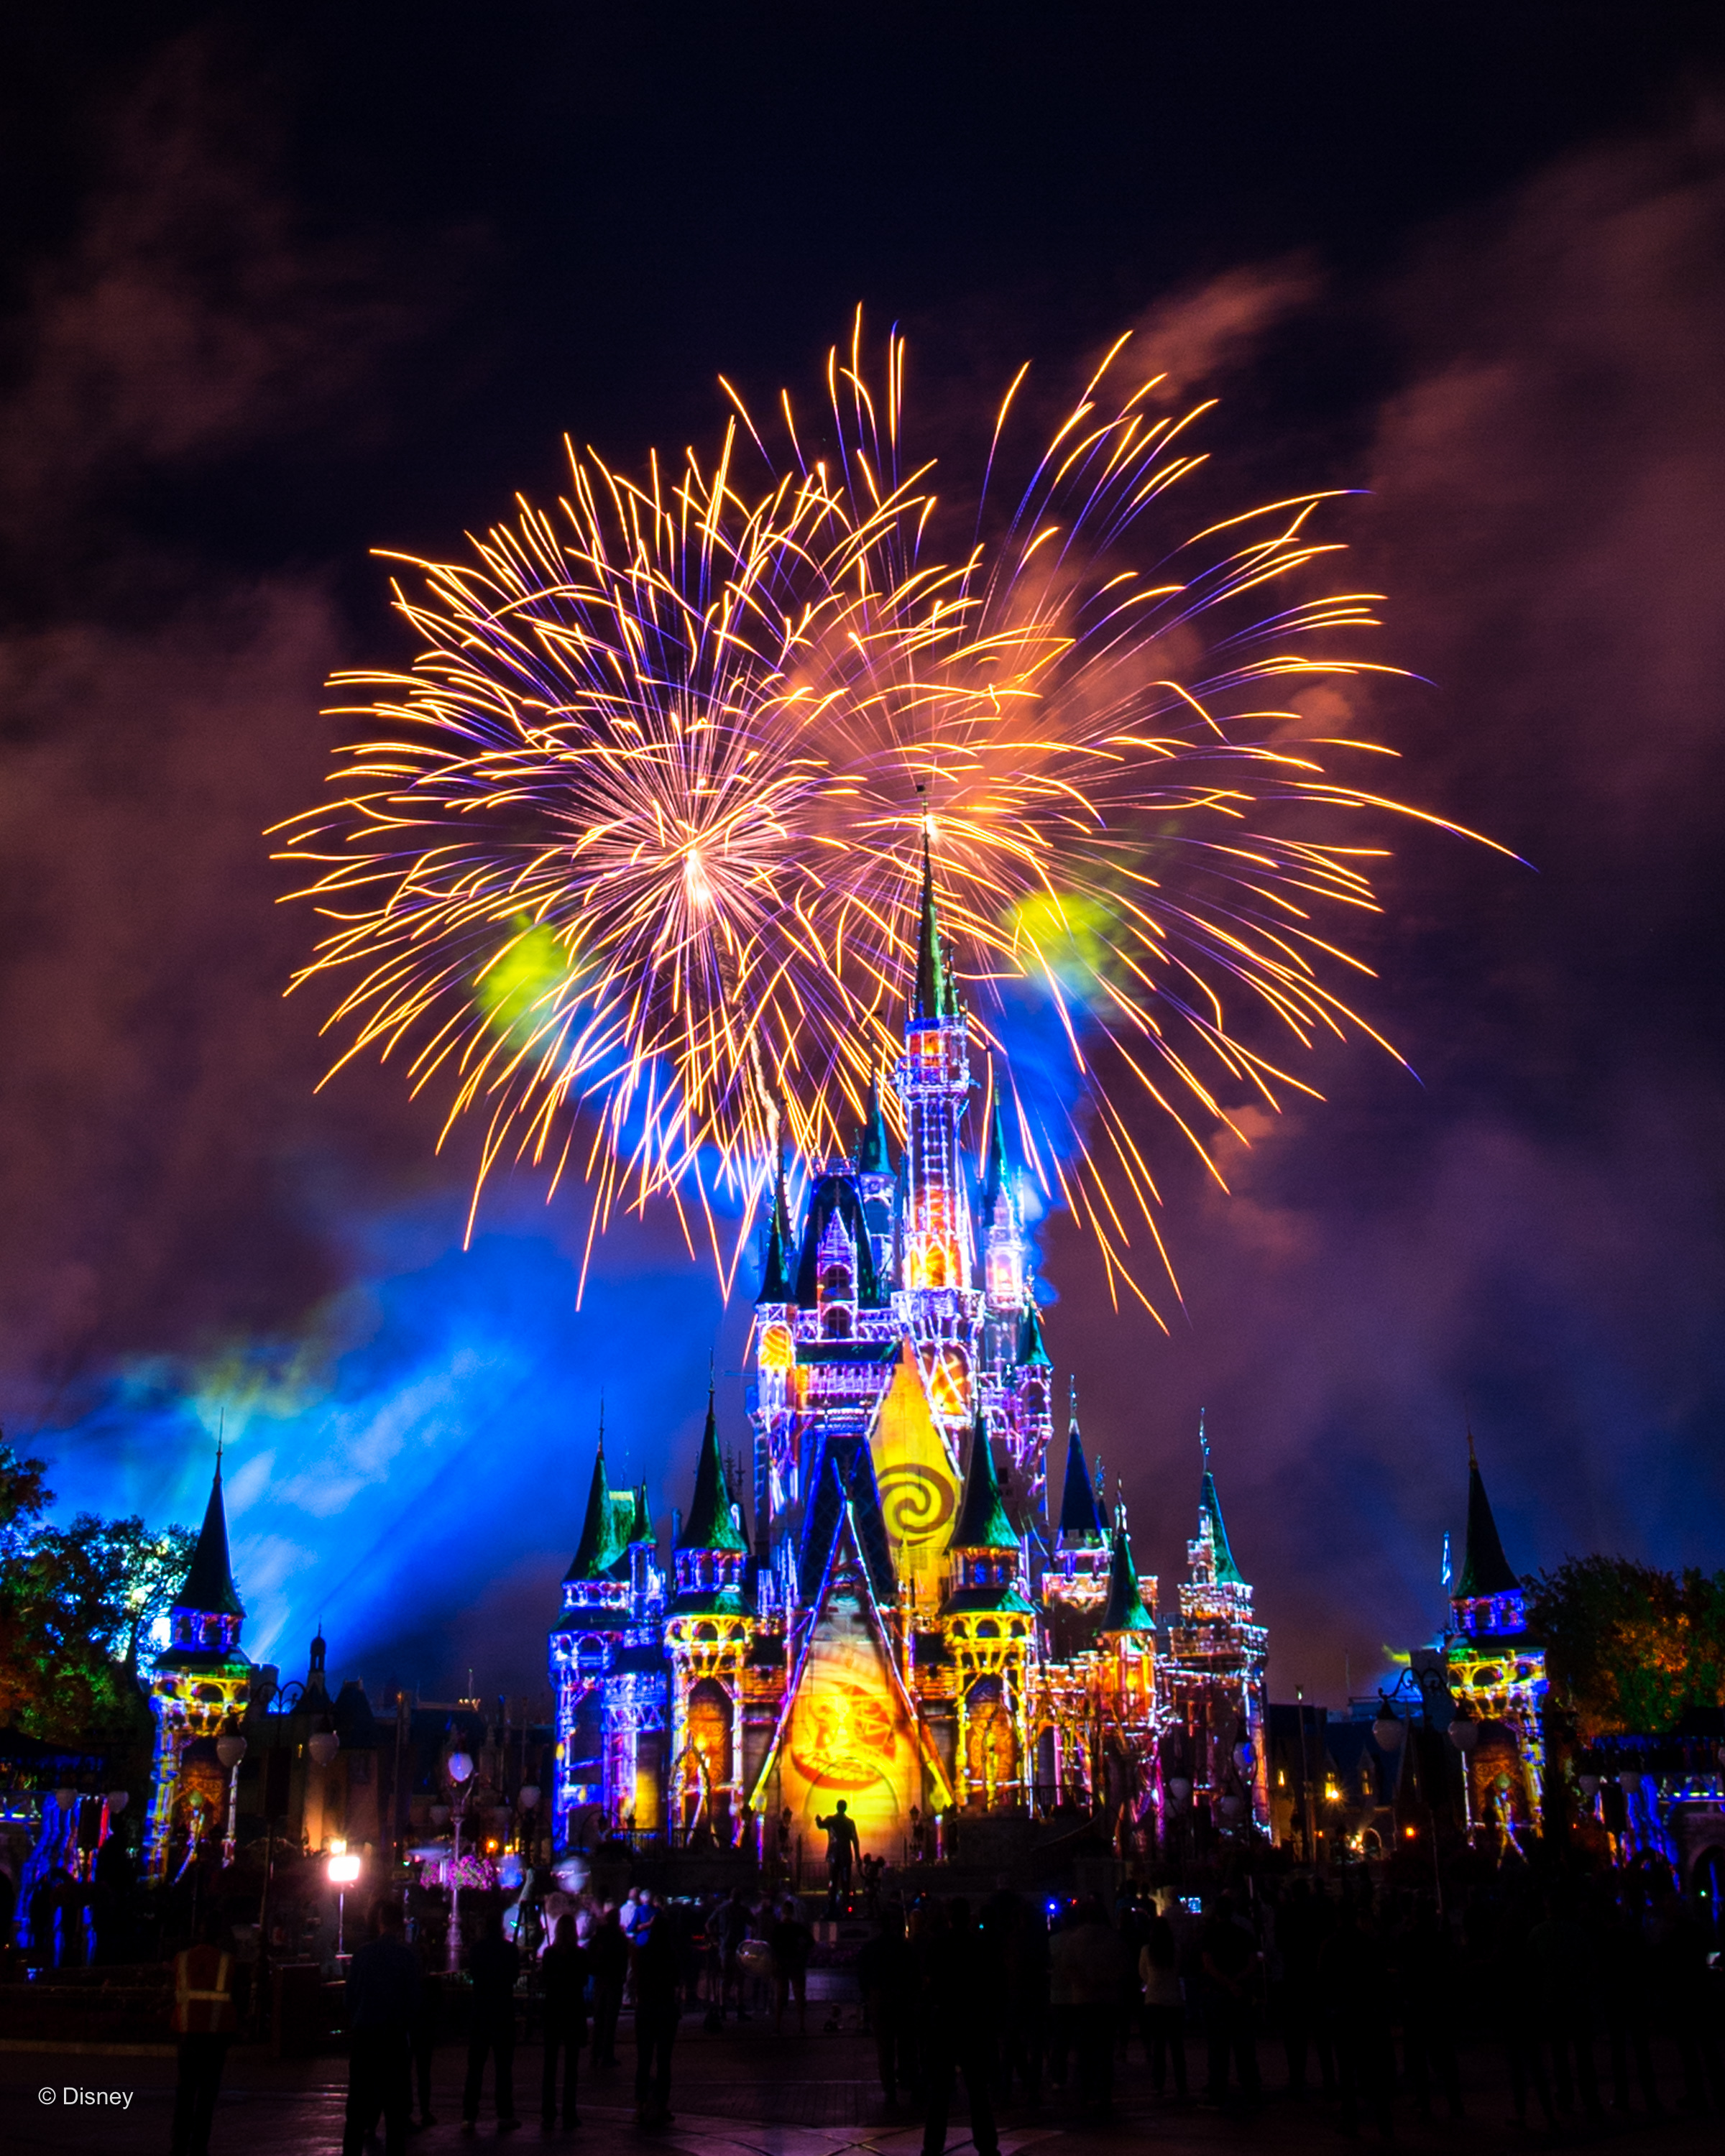 Disney Photopass Releases Free Happily Ever After Mobile And Desktop Wallpapers Available For Download Through June 8 Wdw News Today